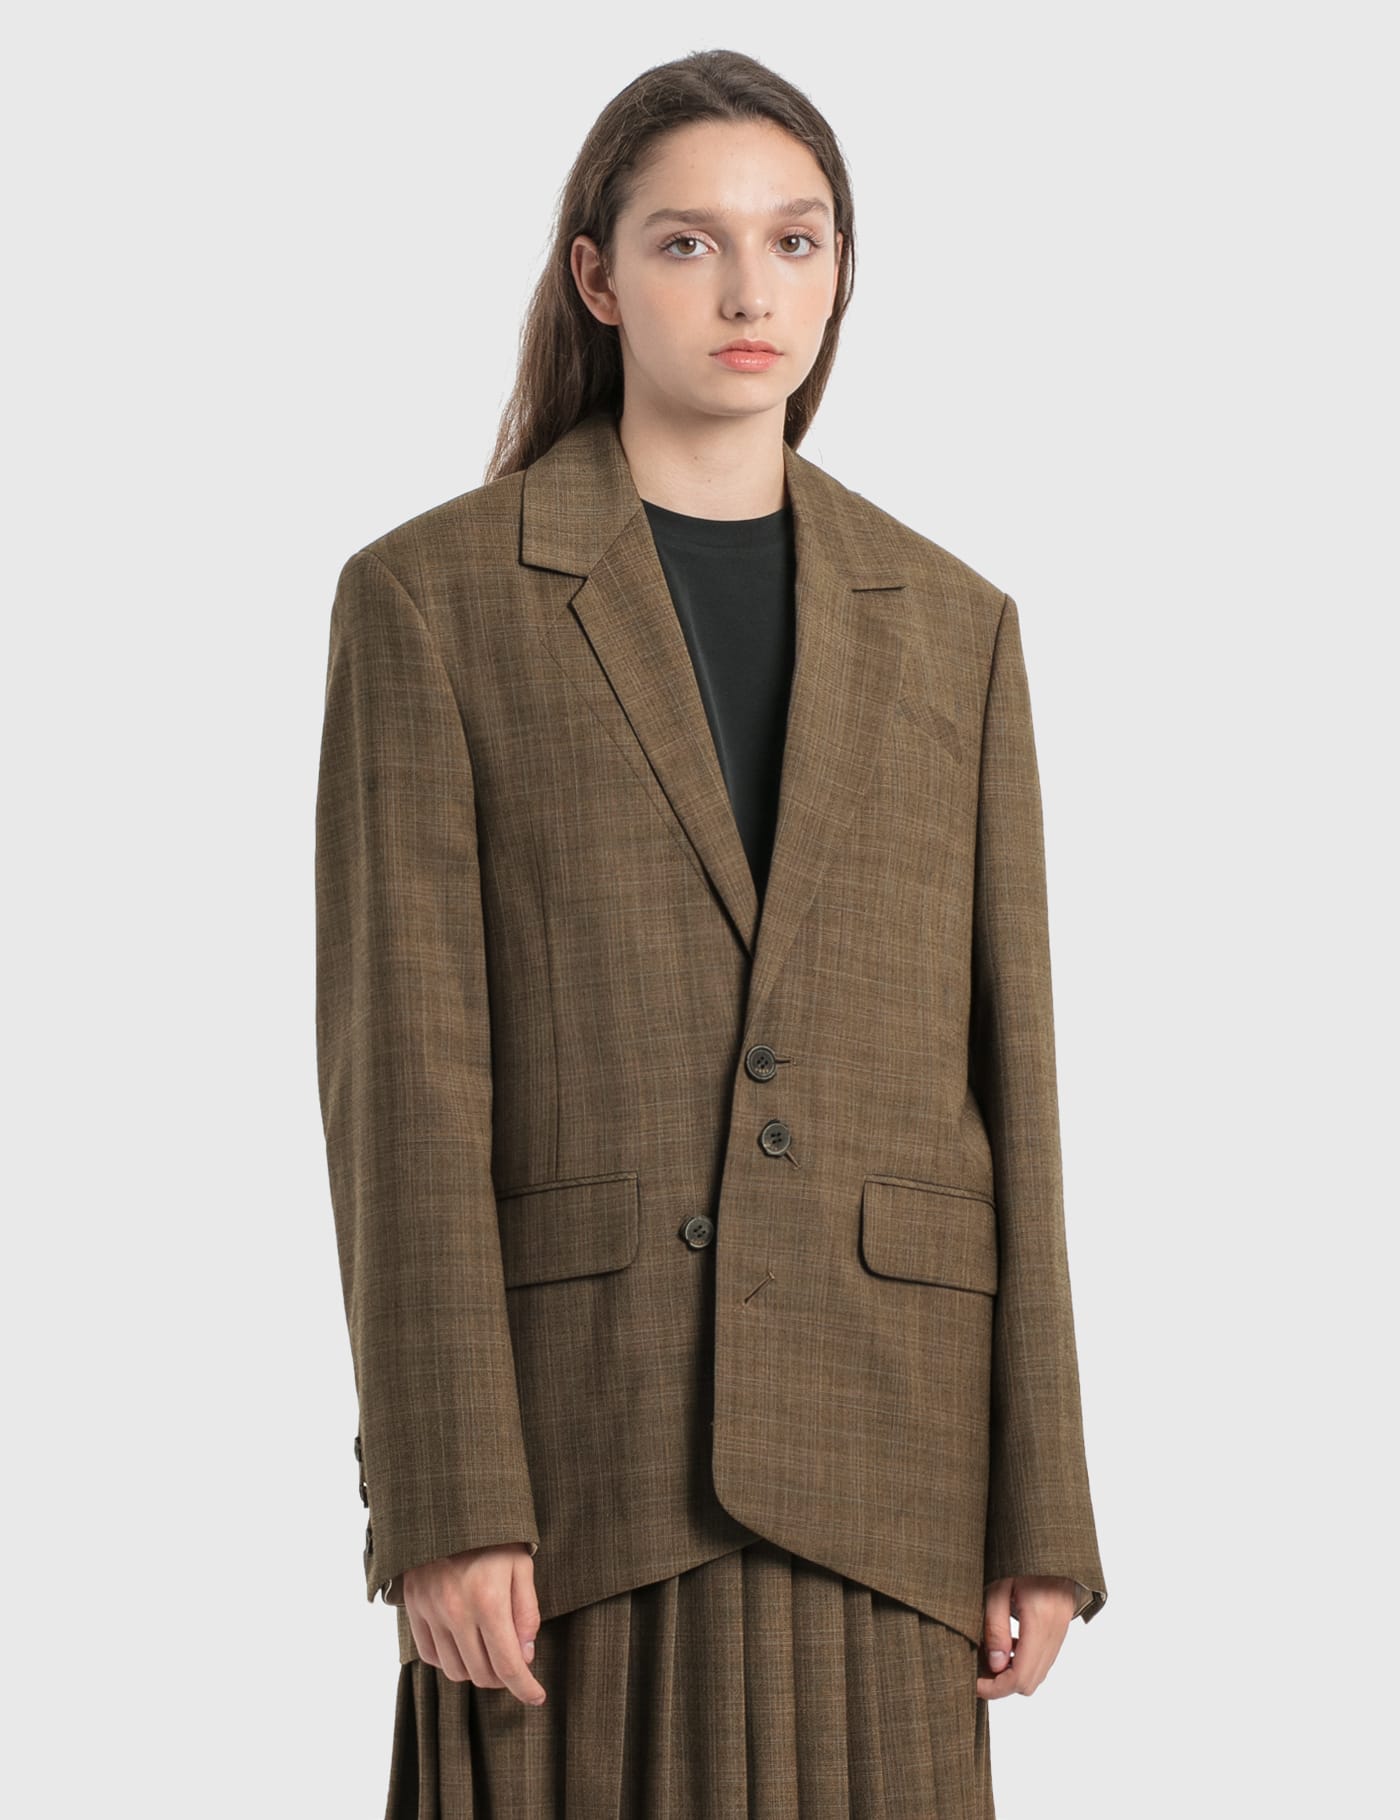 Ader Error - Conak Blazer | HBX - Globally Curated Fashion and Lifestyle by  Hypebeast